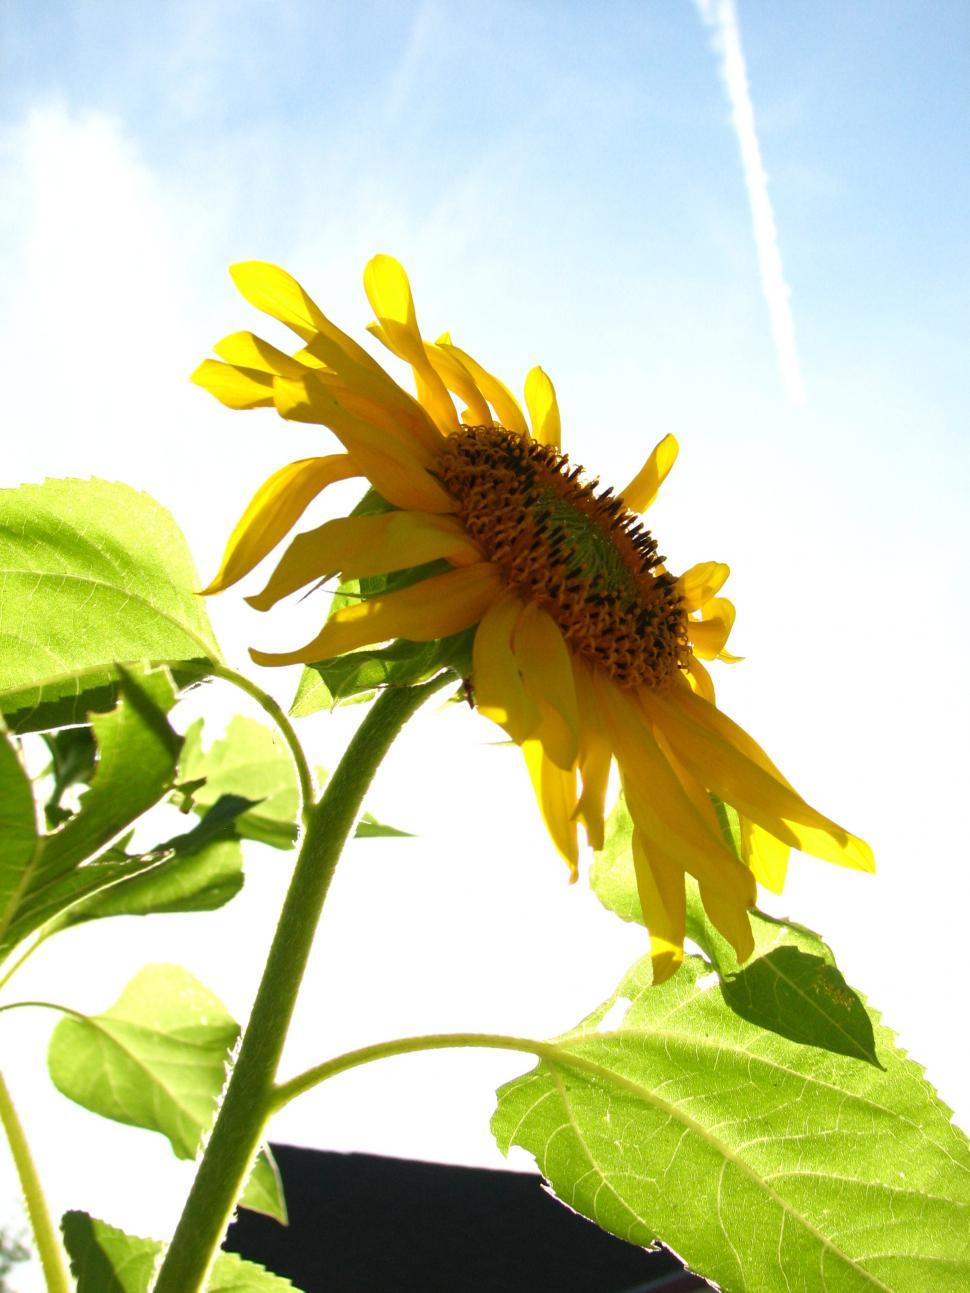 Free Image of Sunflower Blooming Under Blue Sky 